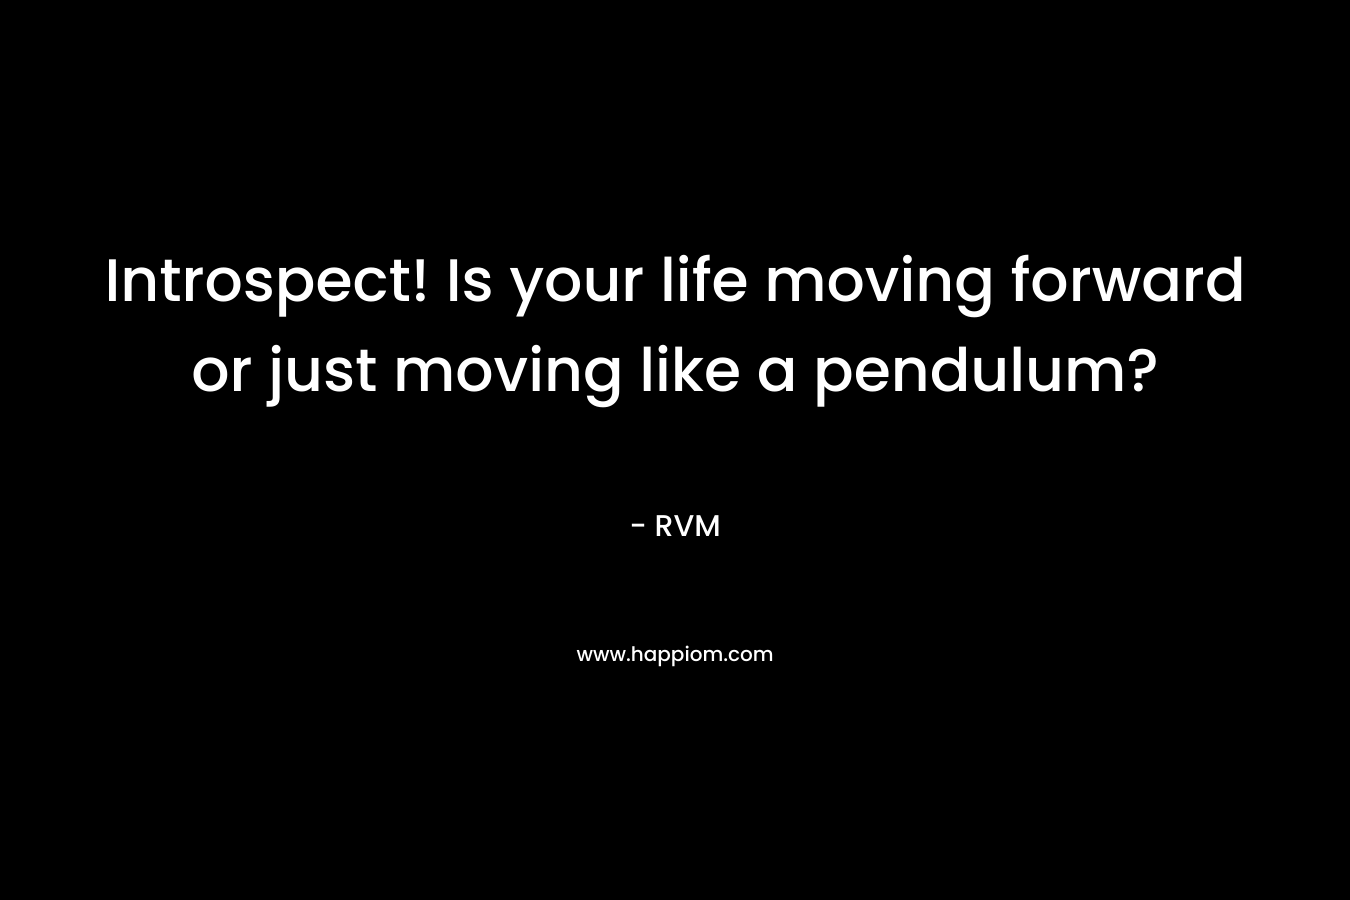 Introspect! Is your life moving forward or just moving like a pendulum?